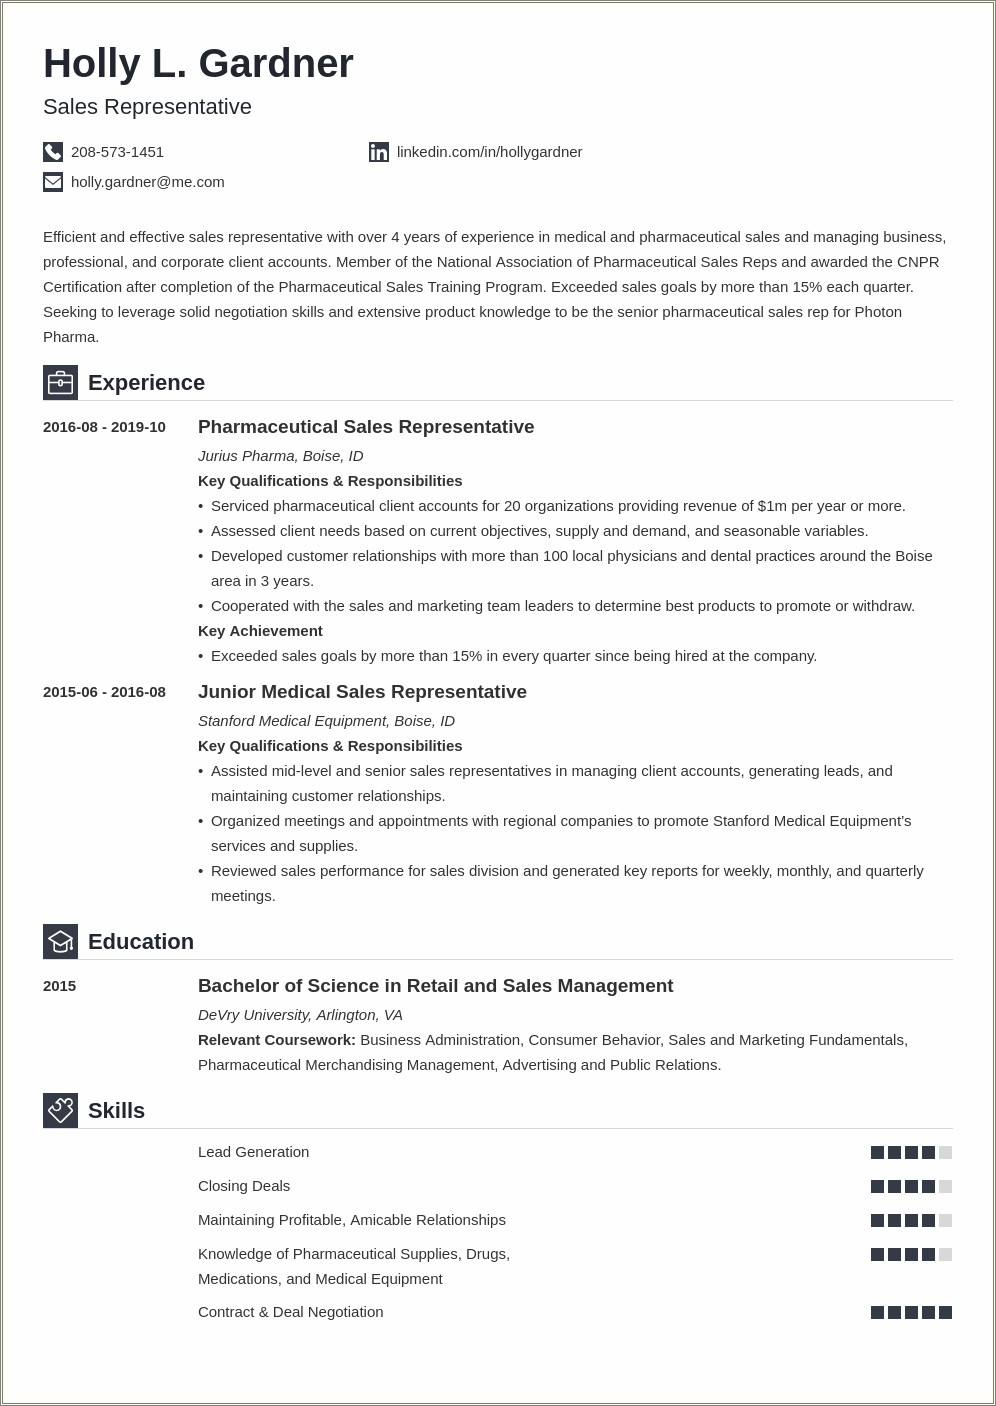 Sample Resume For Sales Lady In Department Store